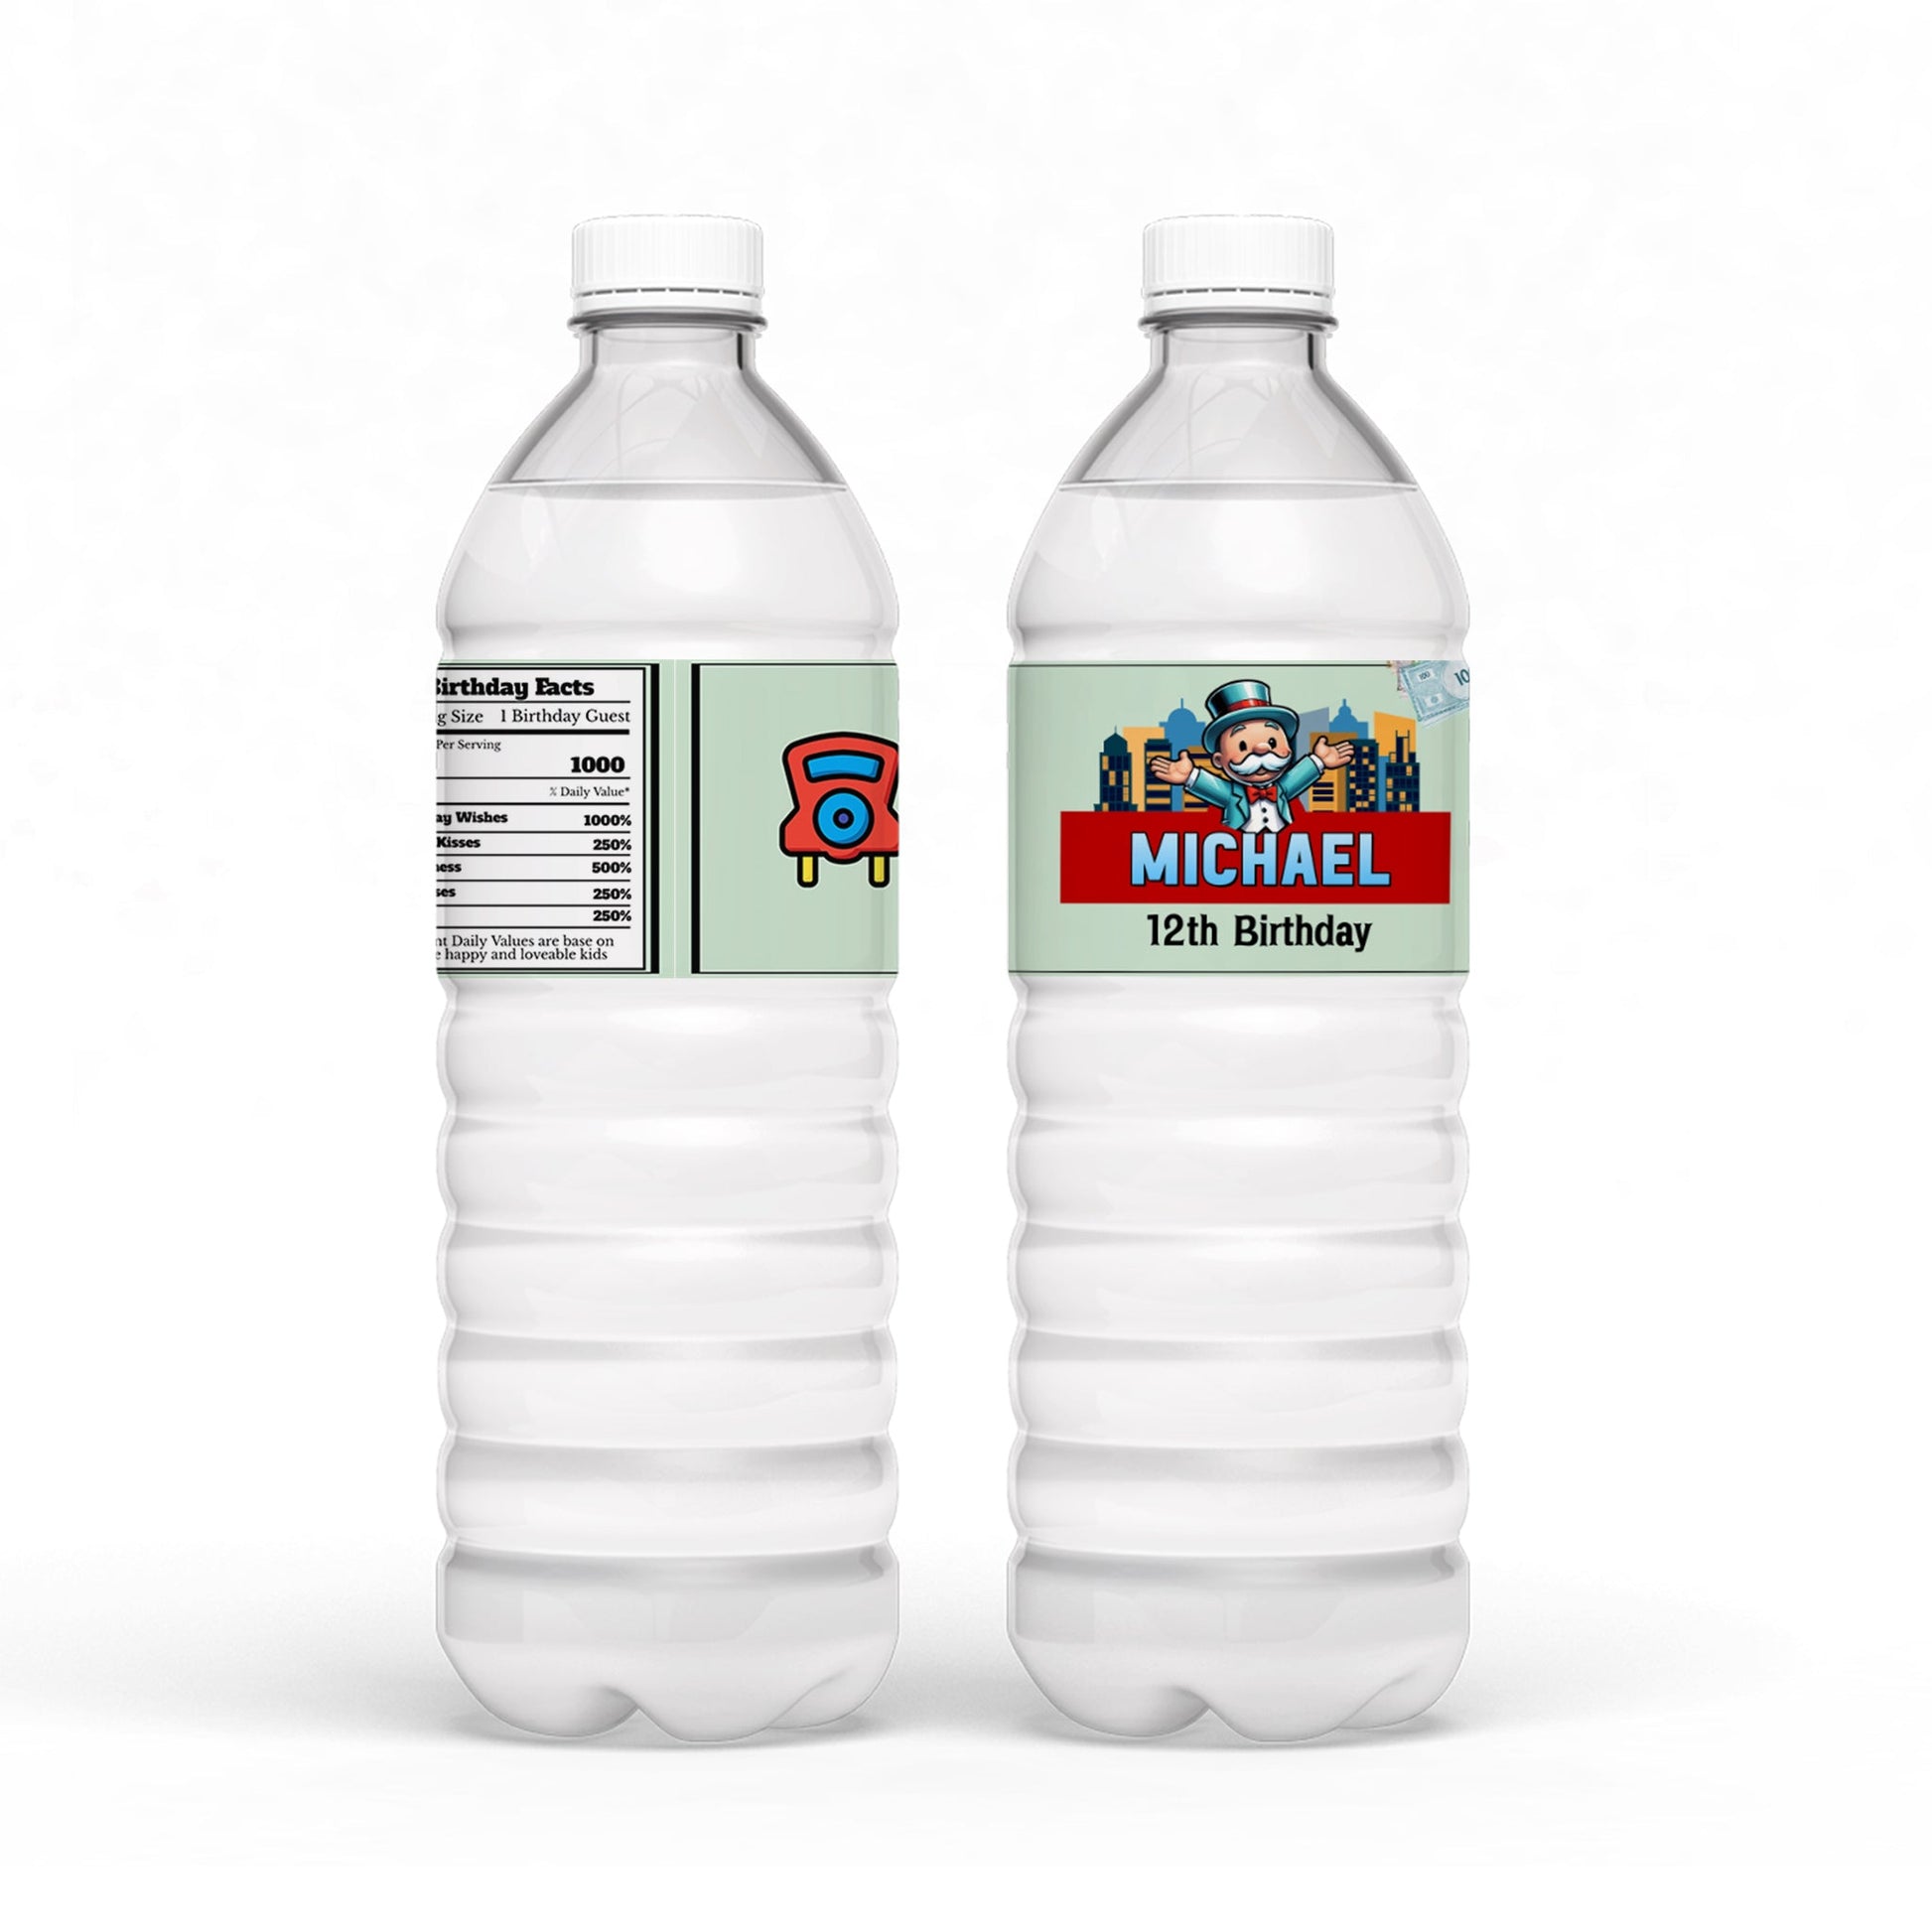 Water bottle label with Monopoly Go design